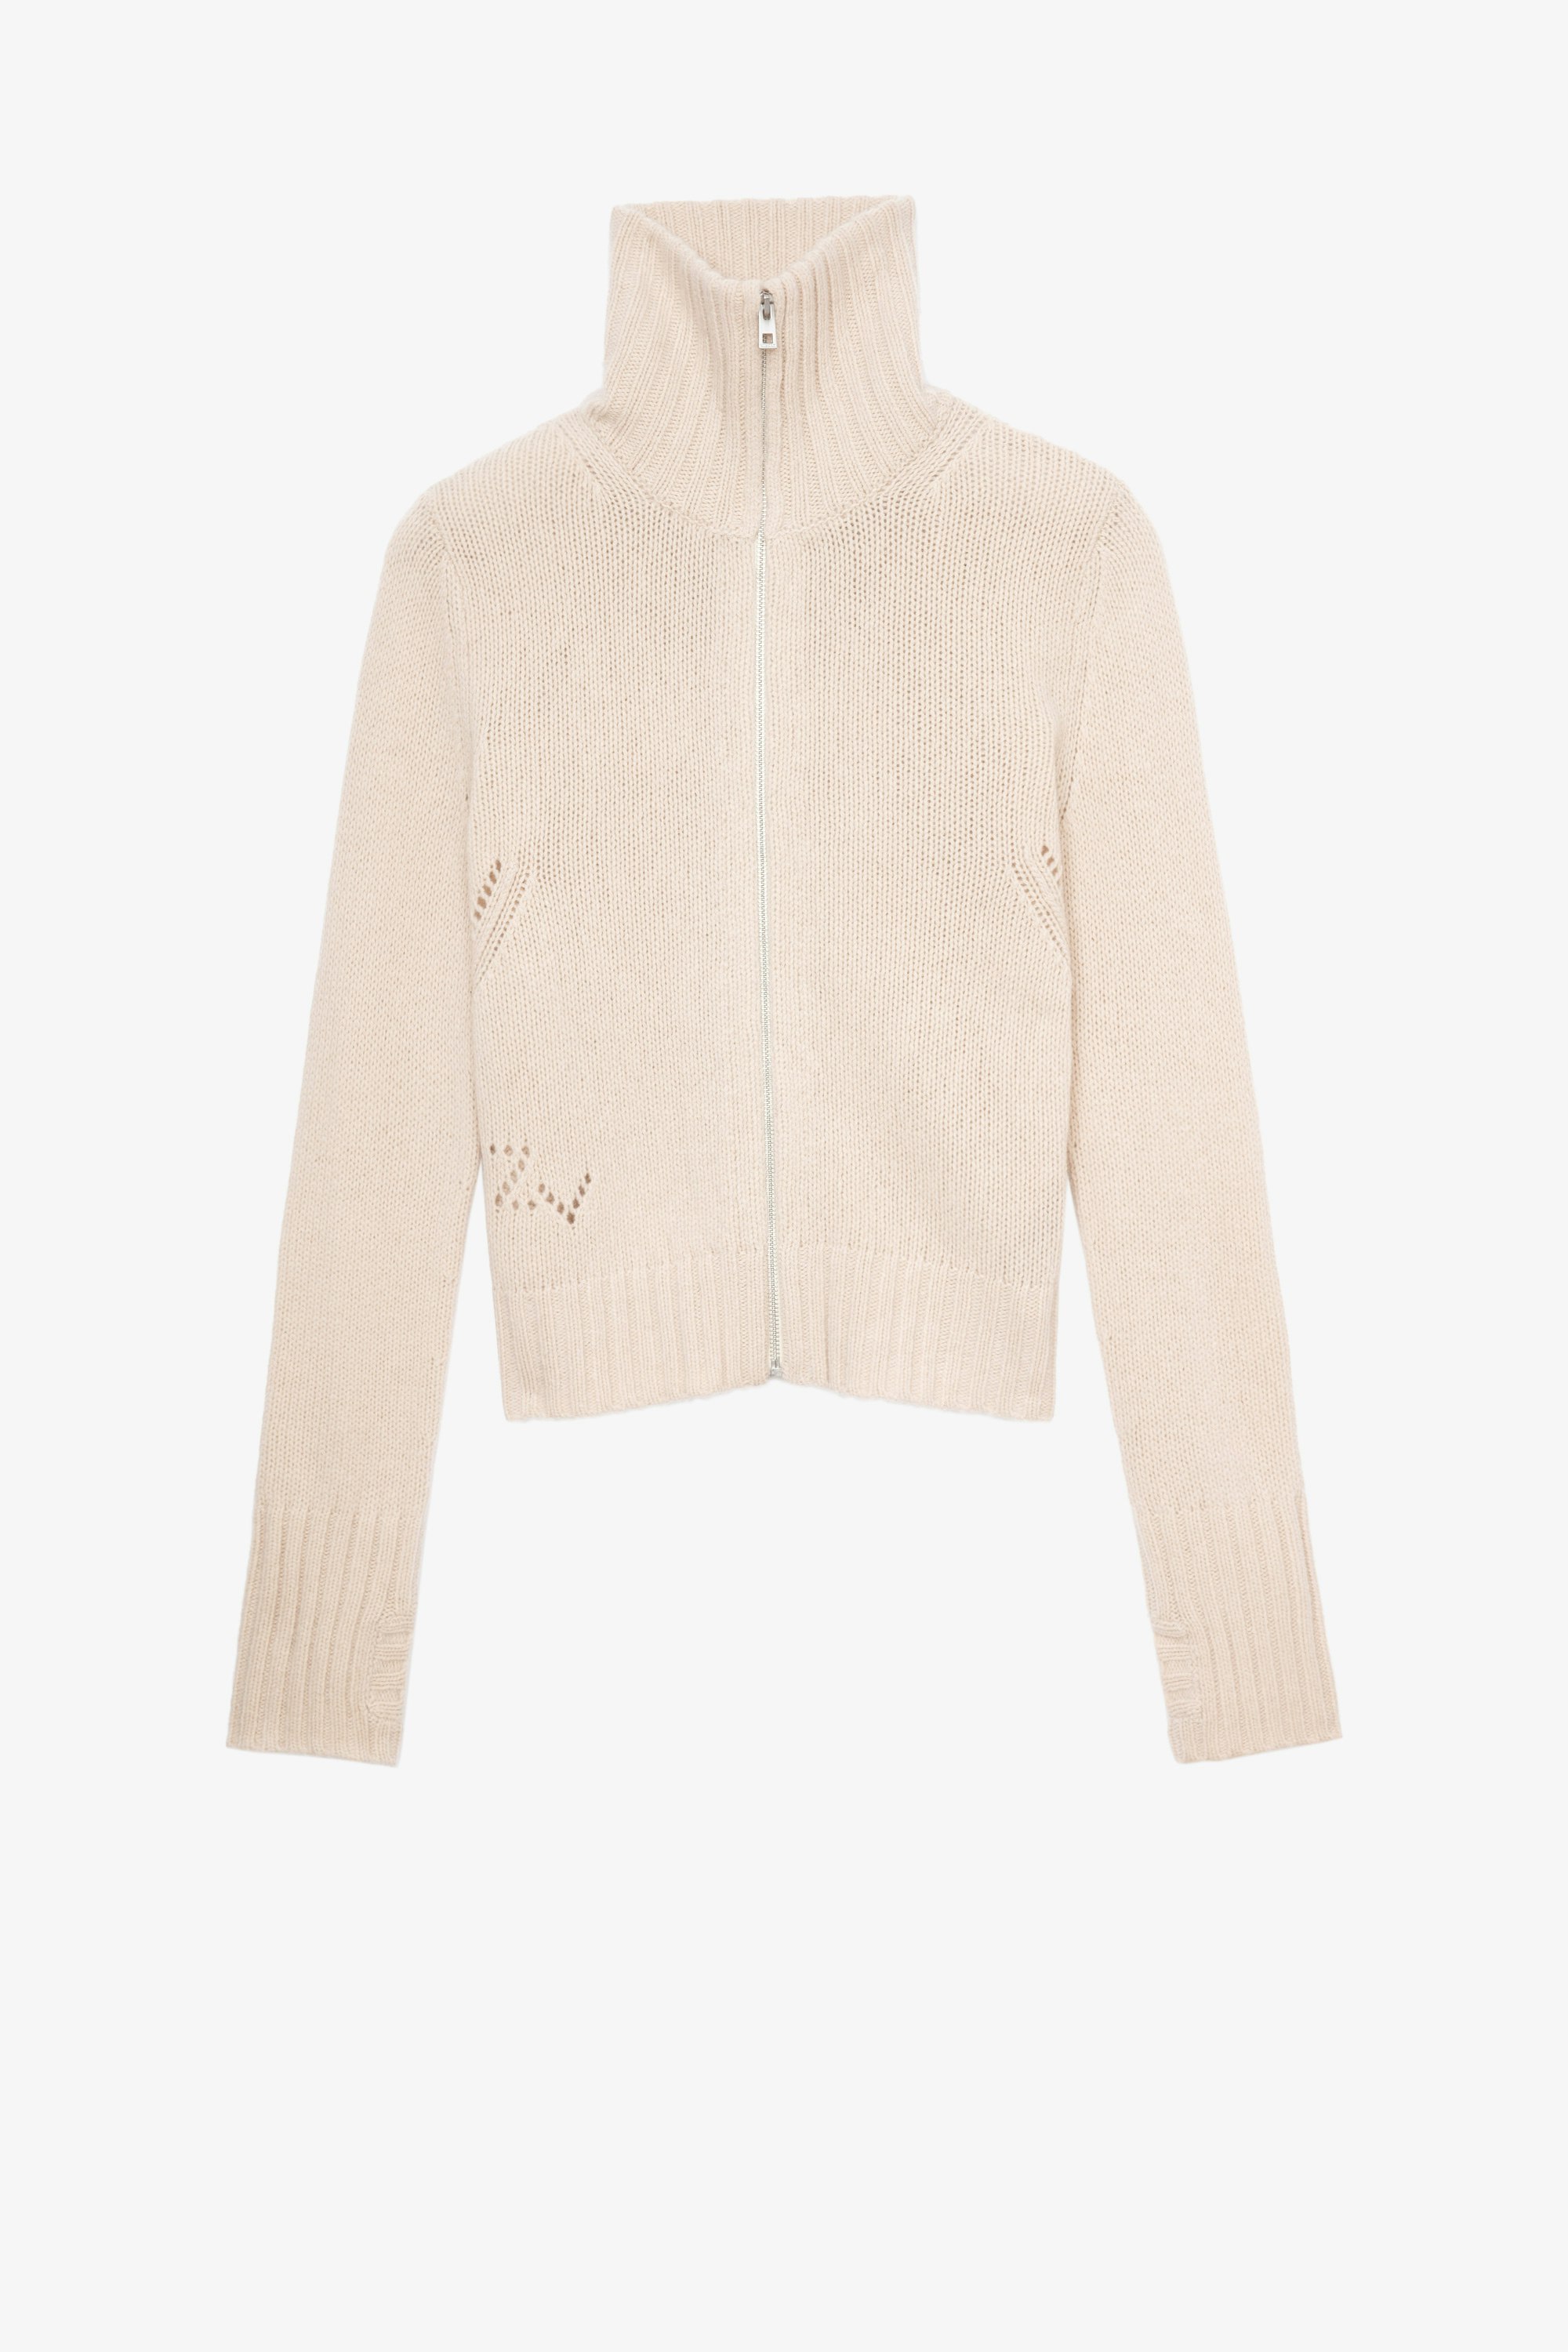 Gilda Cardigan Women’s beige knit zip-up cardigan with stand collar and flocking on the back